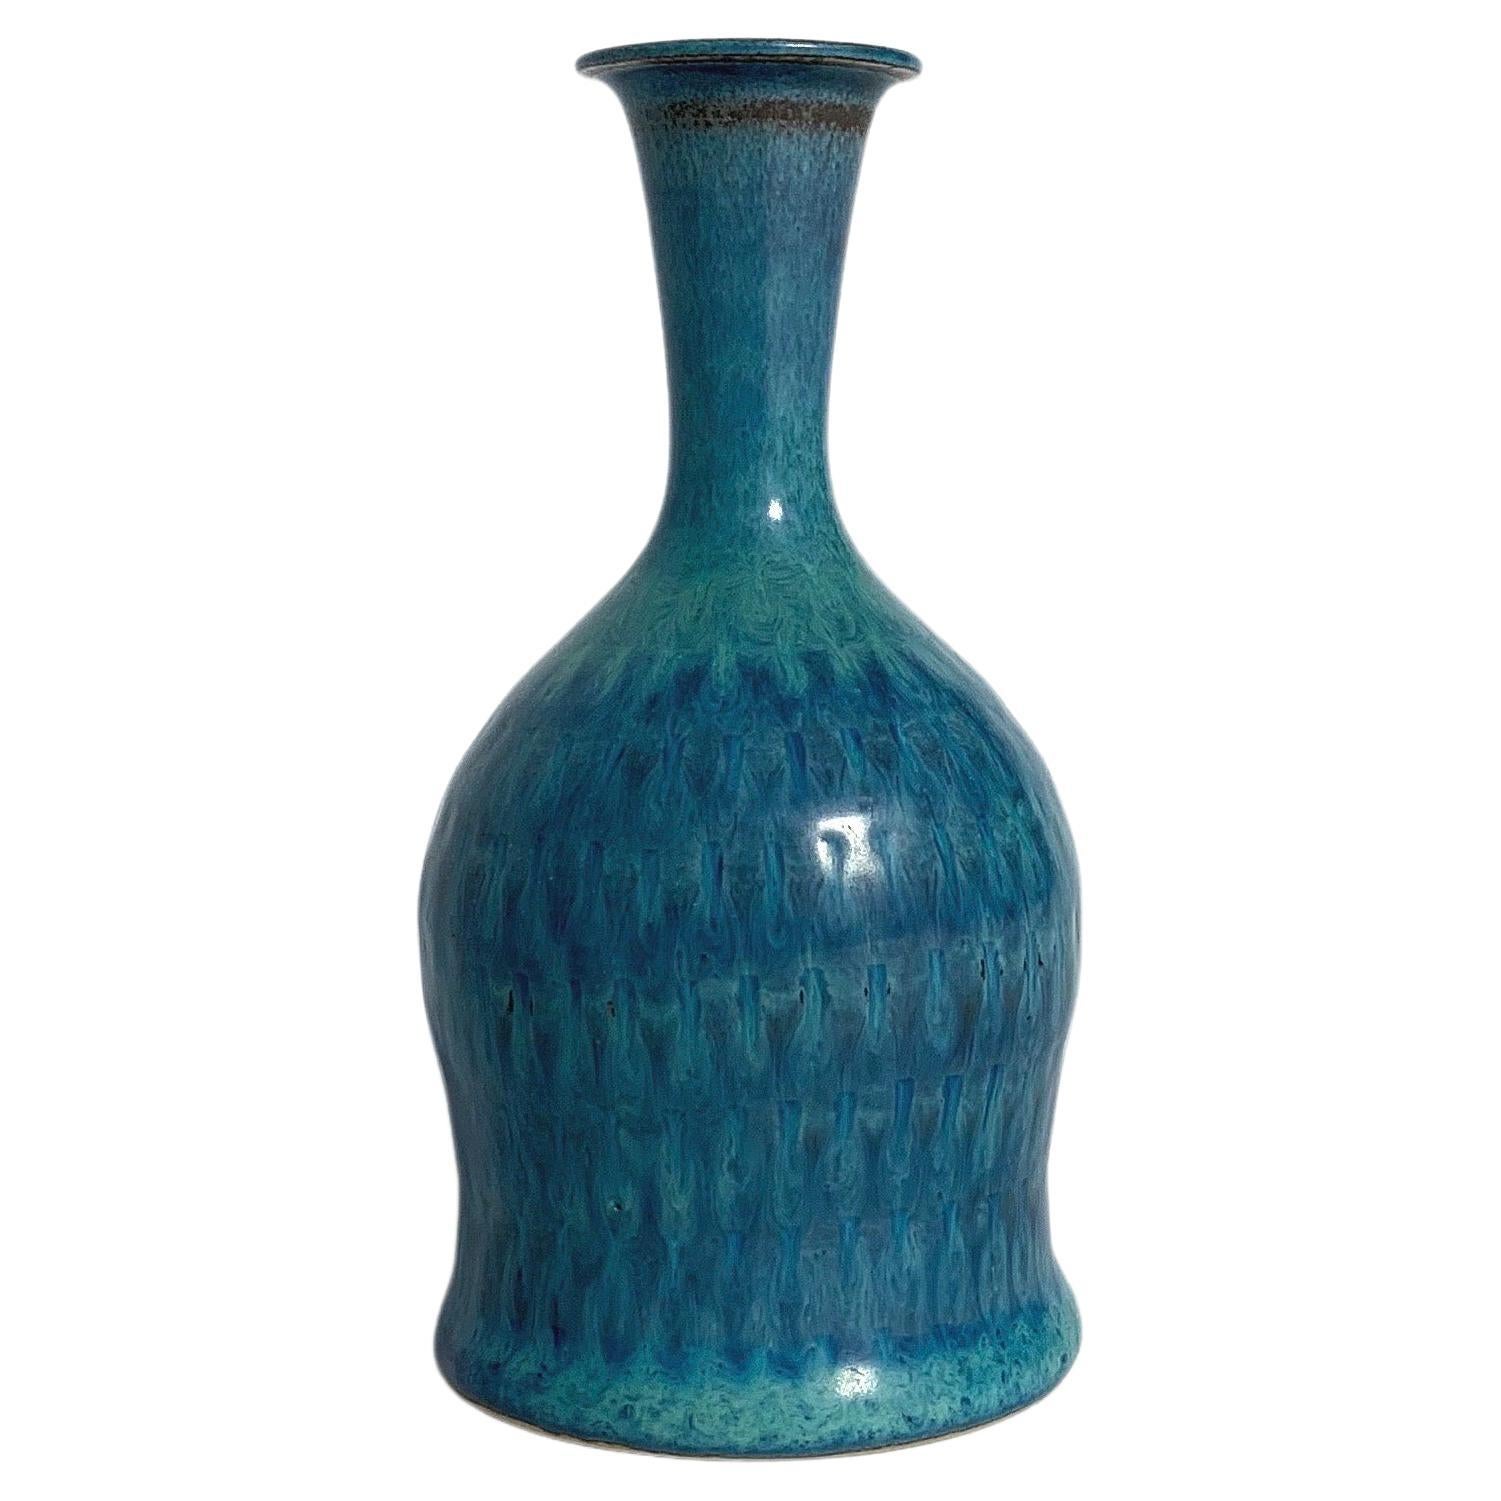 Unique Stig Lindberg vase in a wonderful turquoise blue glaze, hand-crafted for Gustavsberg in Sweden in 1963.

Hand-thrown stoneware with impressed pattern, overglazed. Signed with the artists signature from 1963.

Height: 11.5 cm
Diameter: 5.5 cm